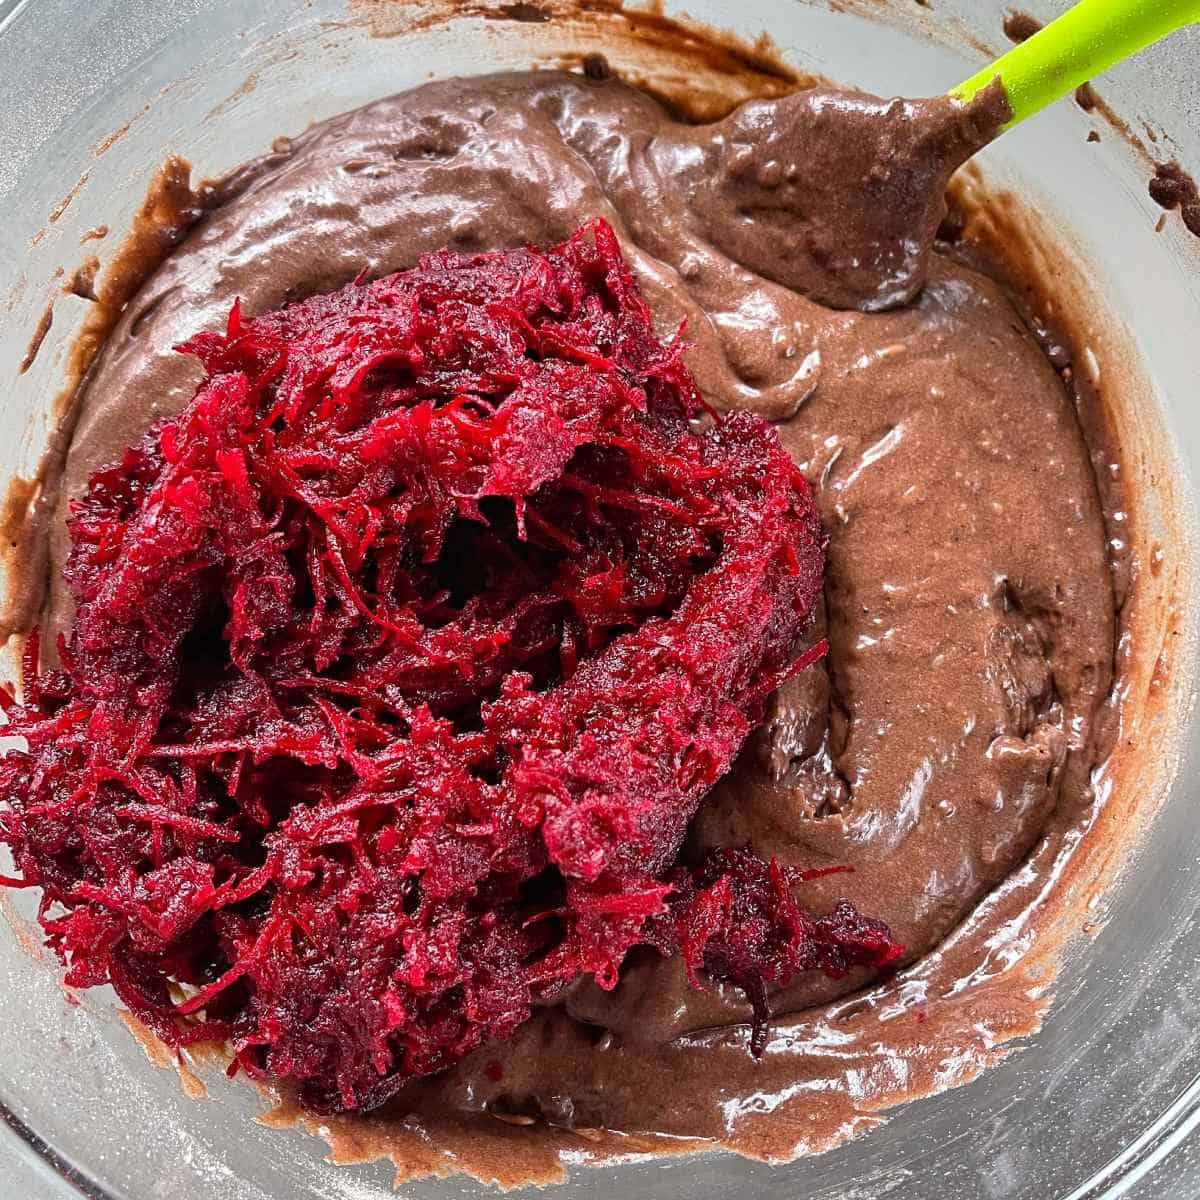 The Beetroot and Chocolate loaf mixture in a glass bowl, the grated beetroot has been added but not stirred through.